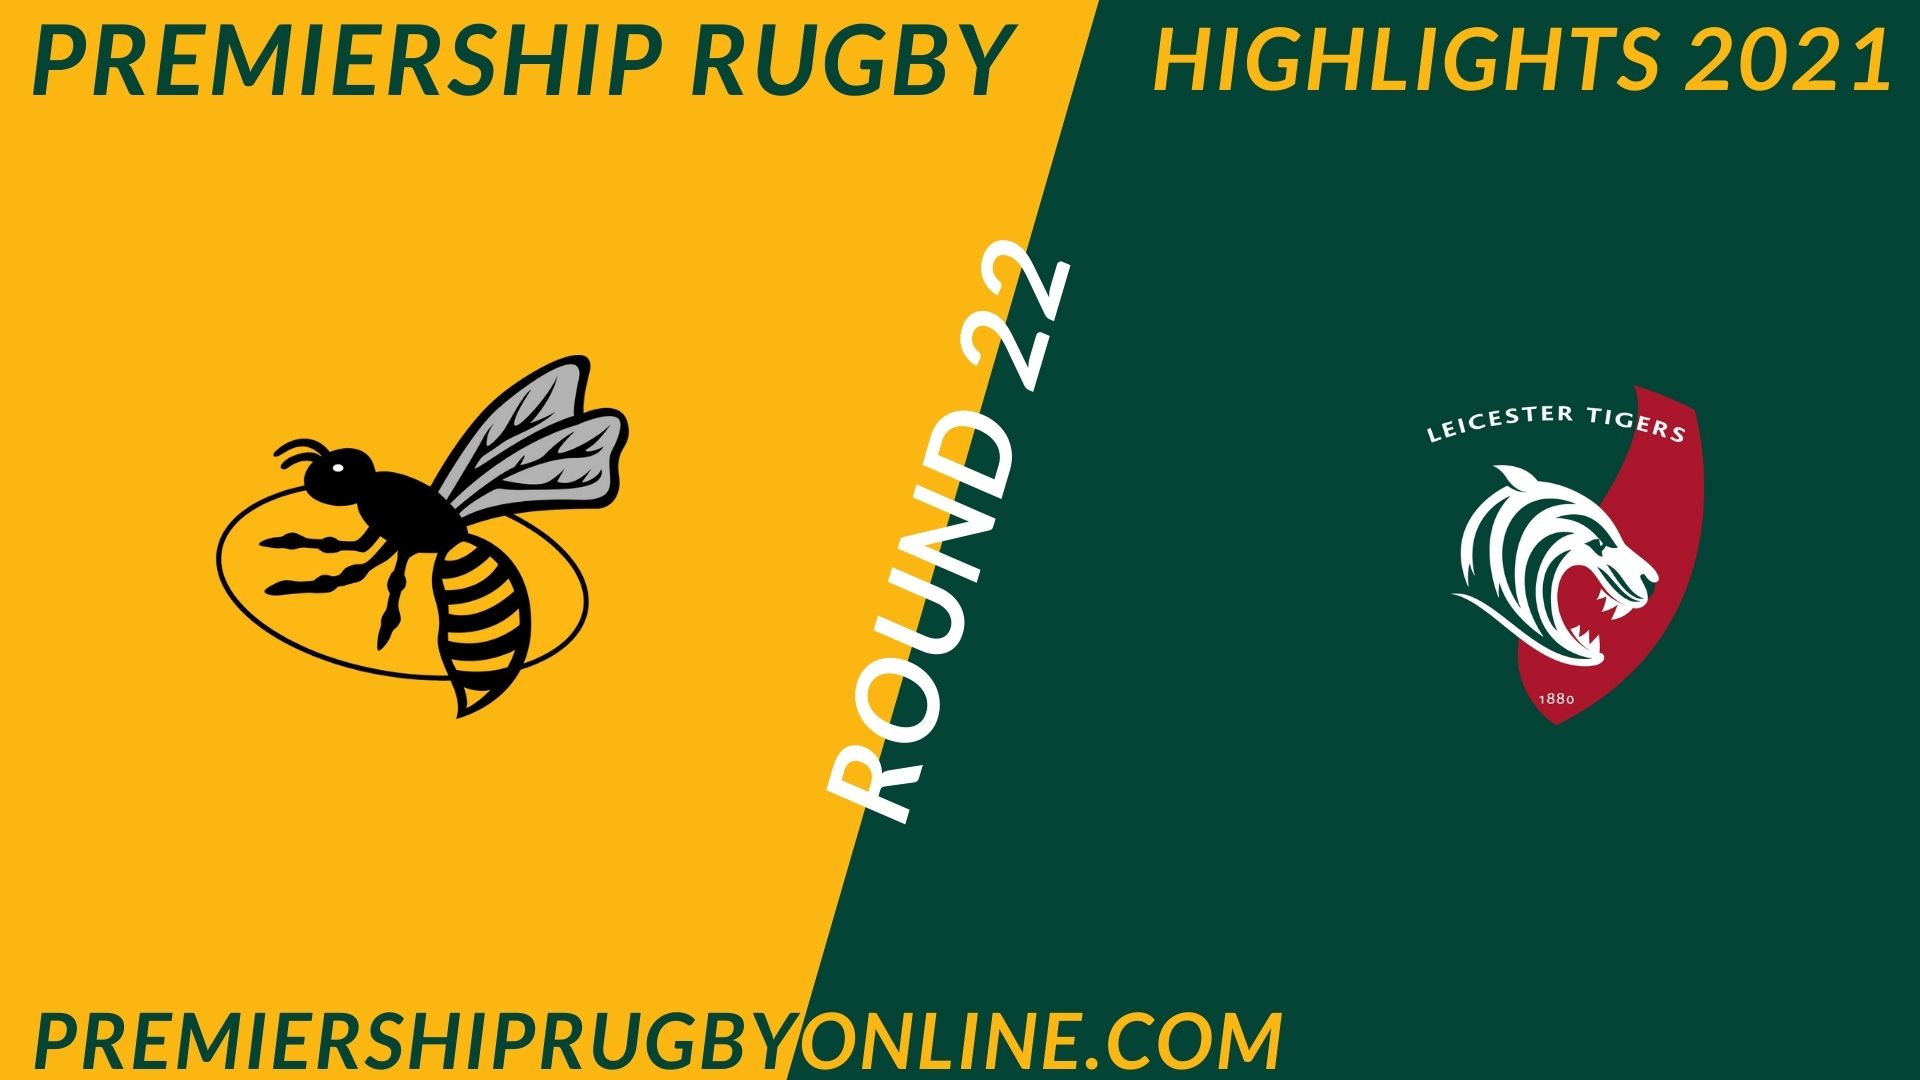 Wasps Vs Leicester Tigers Highlights 2021 RD 22